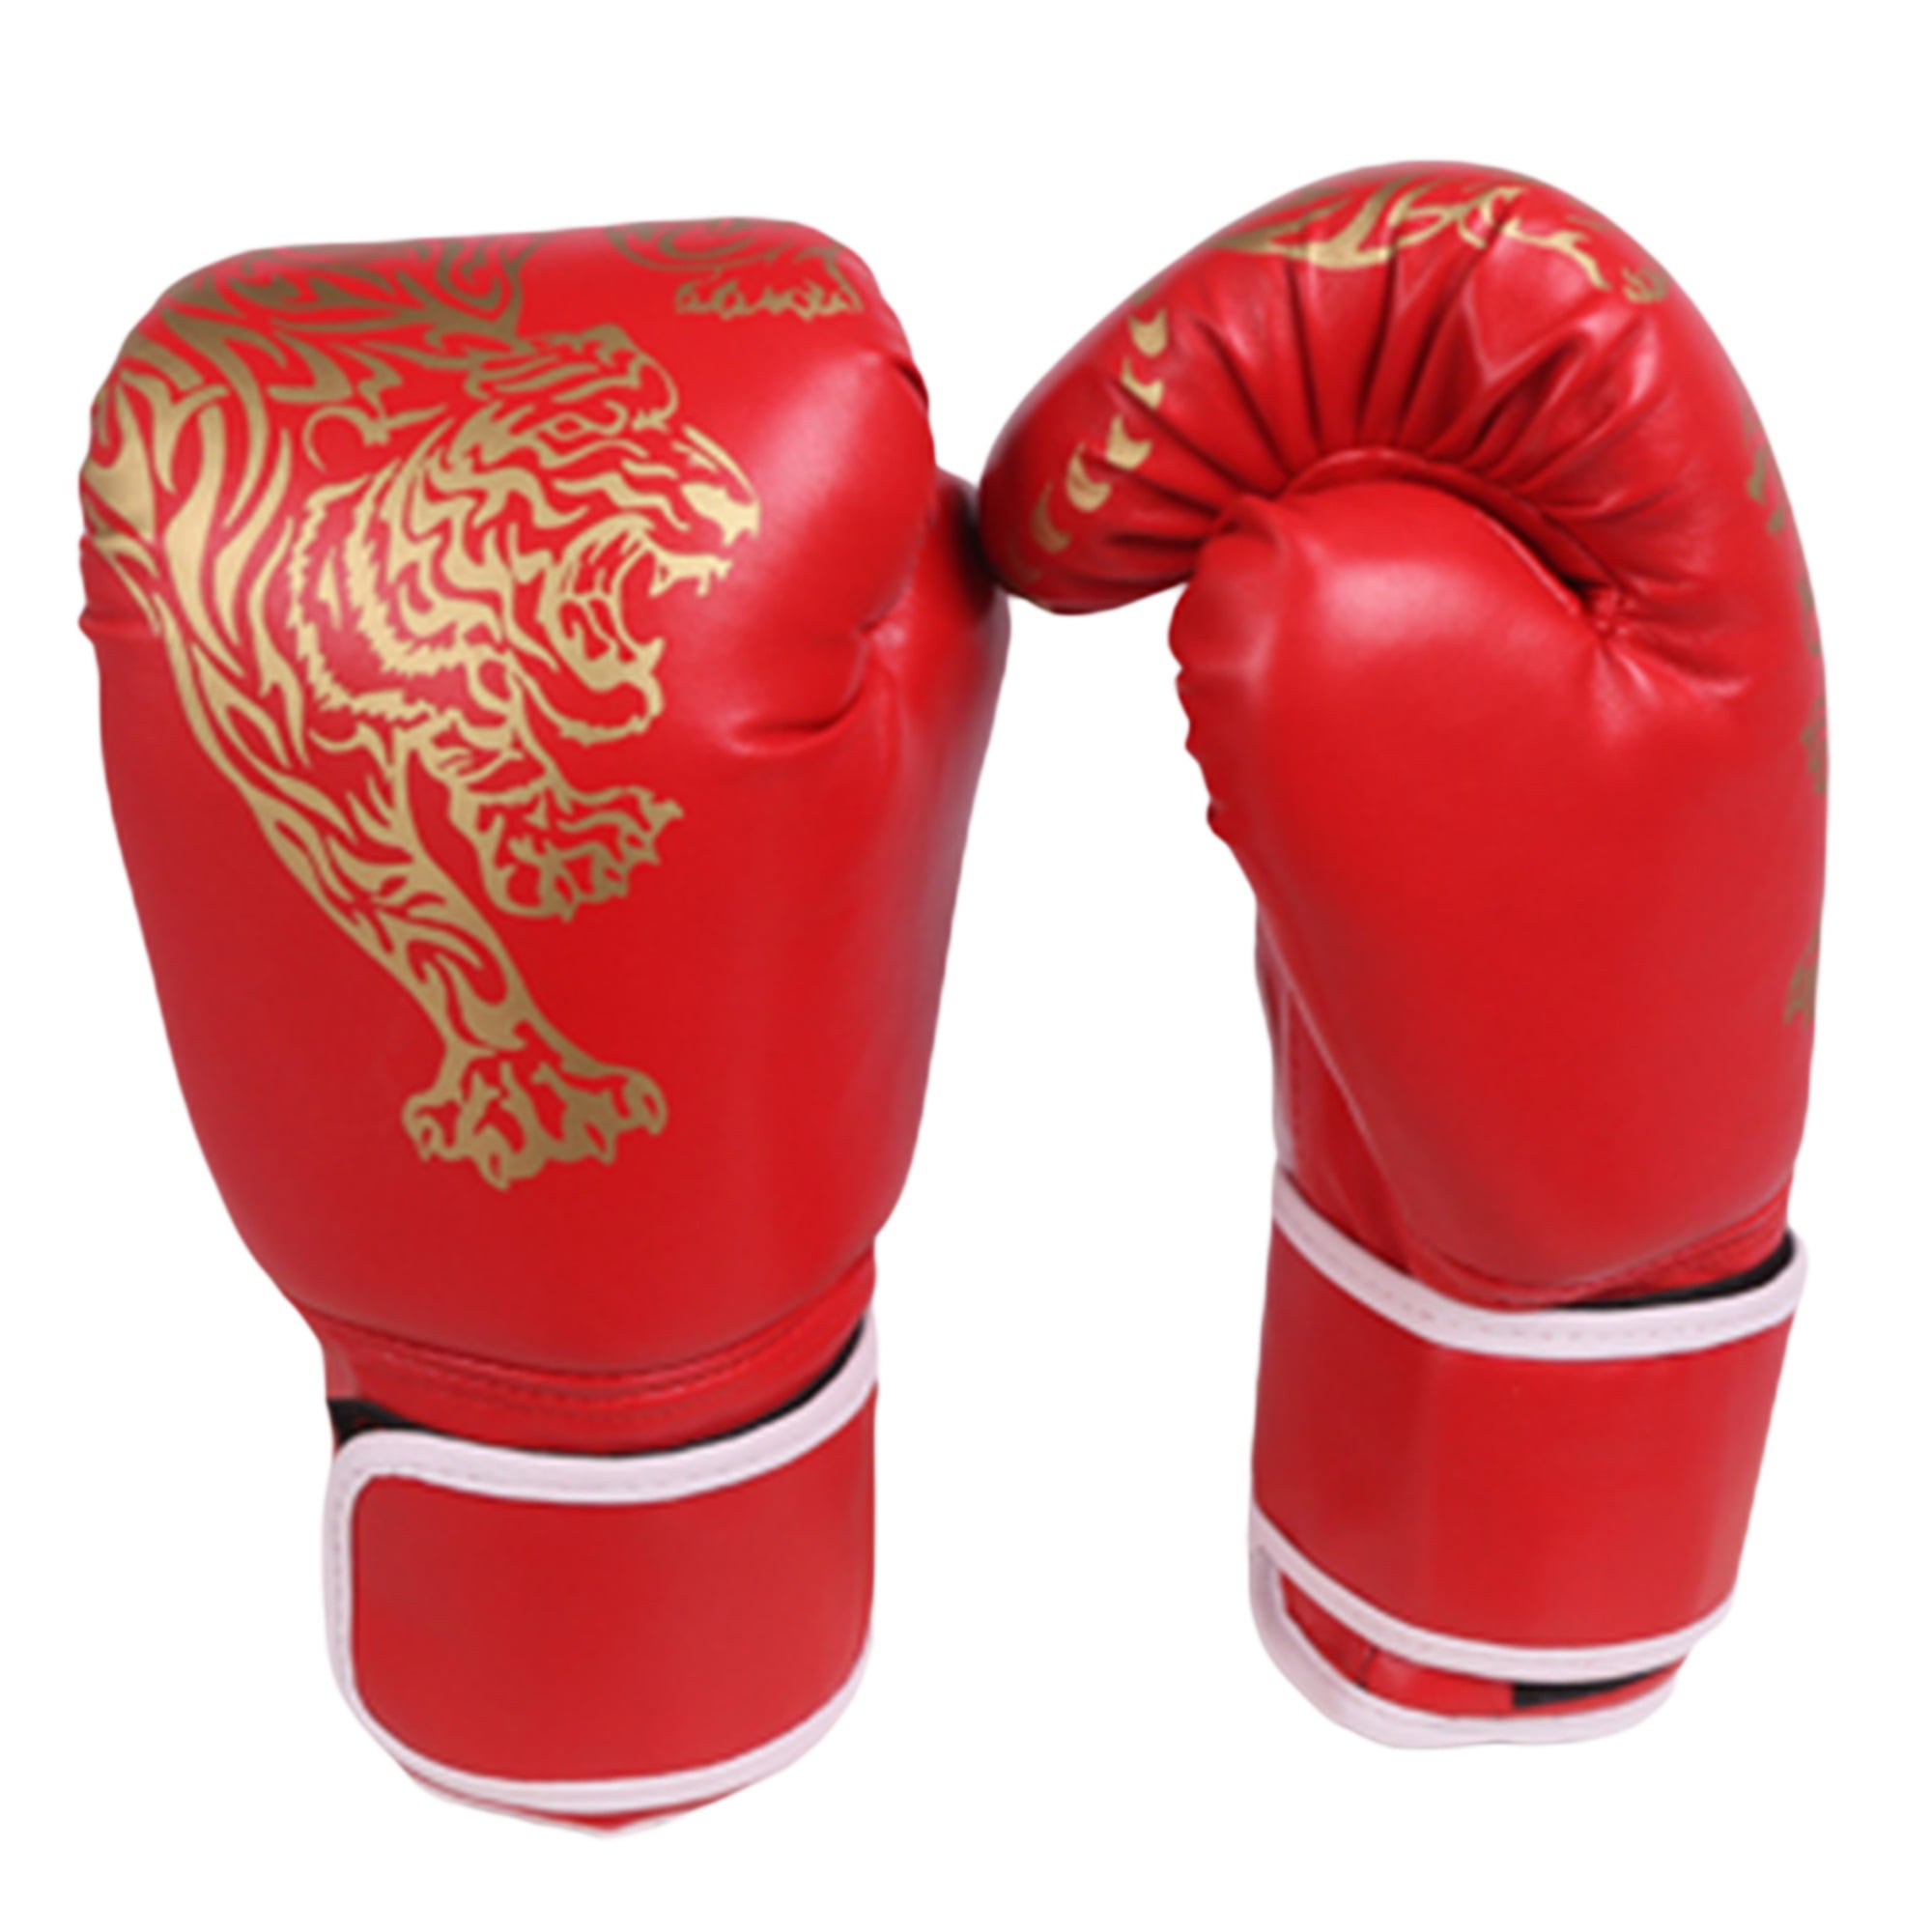 Details about   Sports Training Sparring Muay Thai Boxing Gloves Kids Children Fight Mitts 